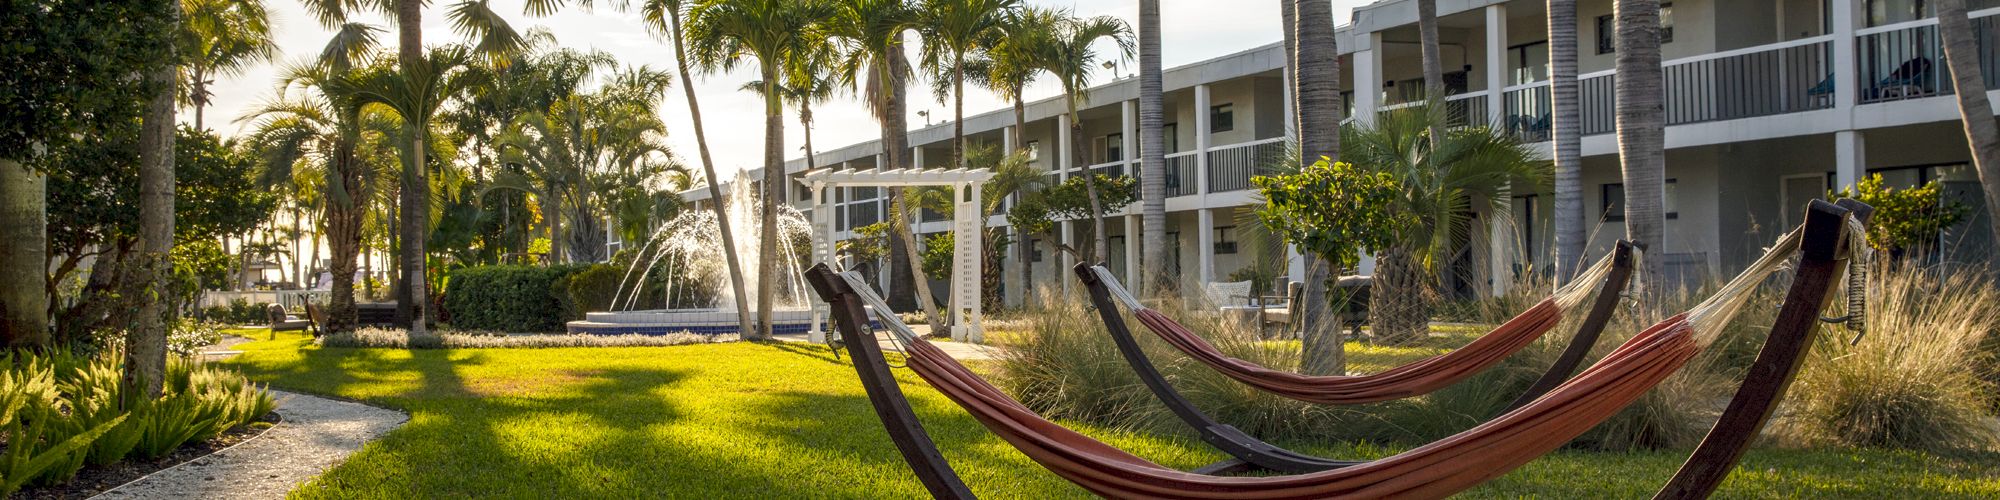 A peaceful outdoor setting with hammocks, a fountain, and an apartment building.